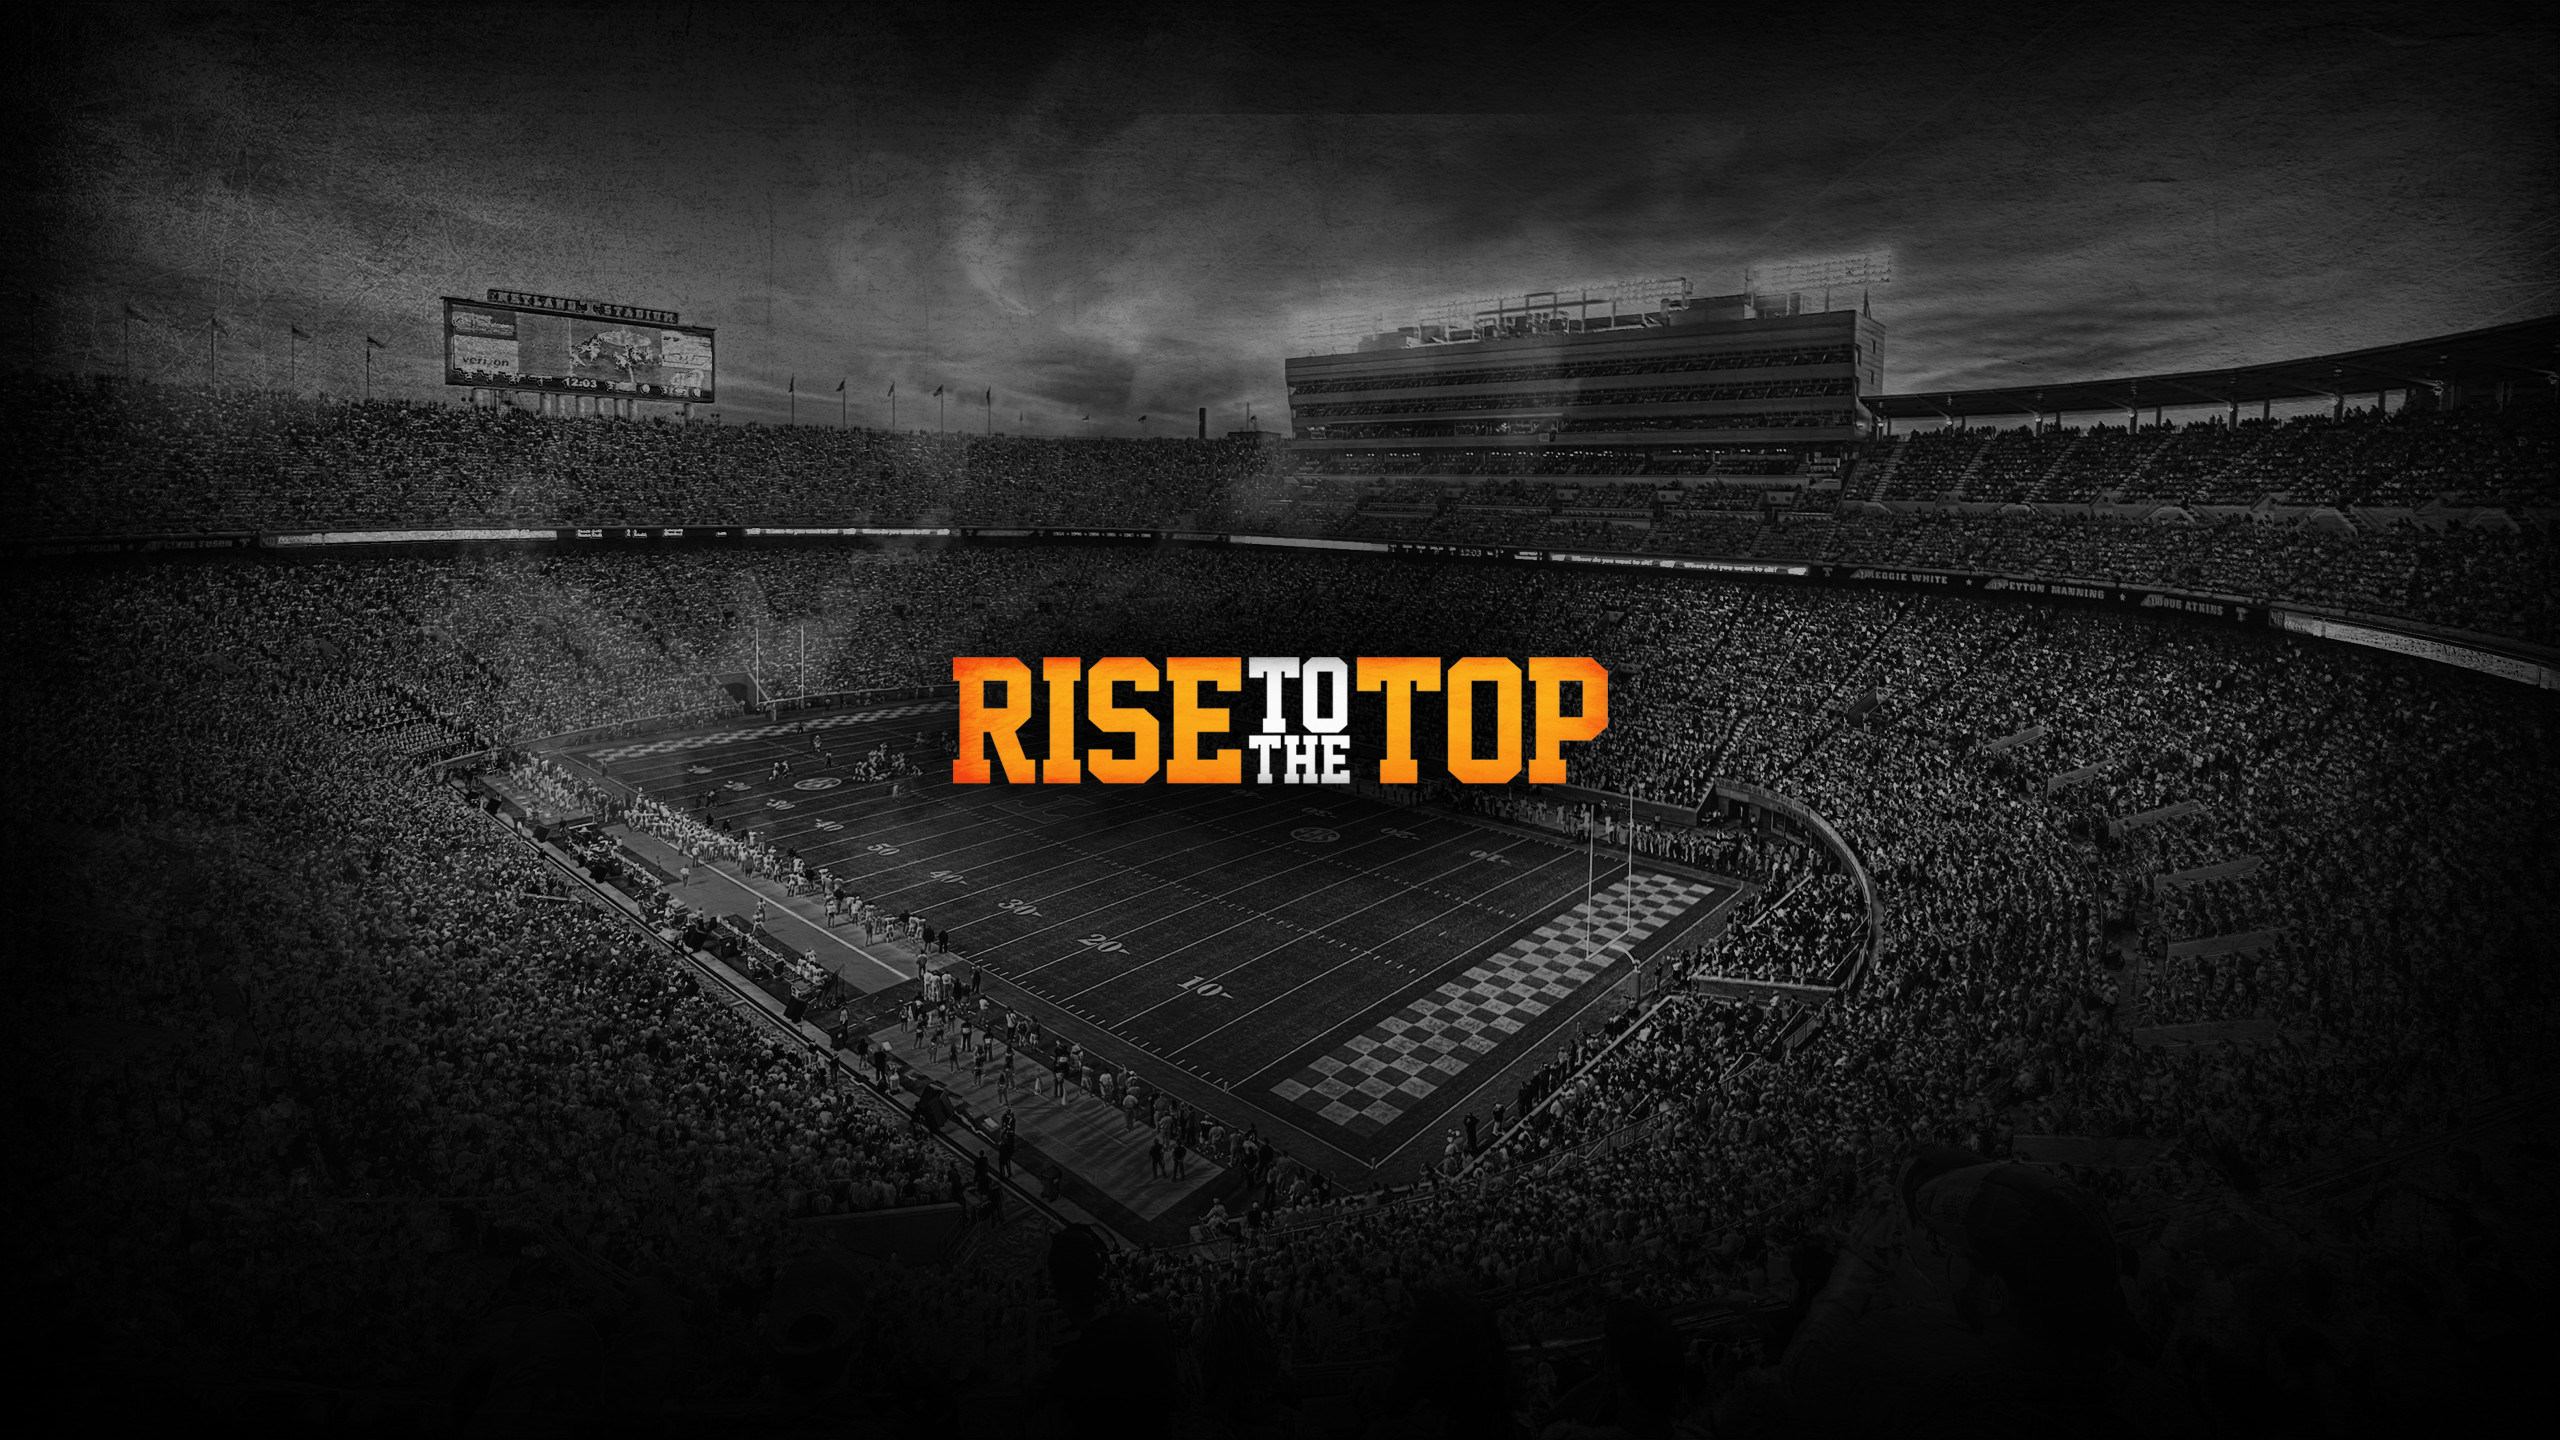 2560x1440 The State of the Vols Address”